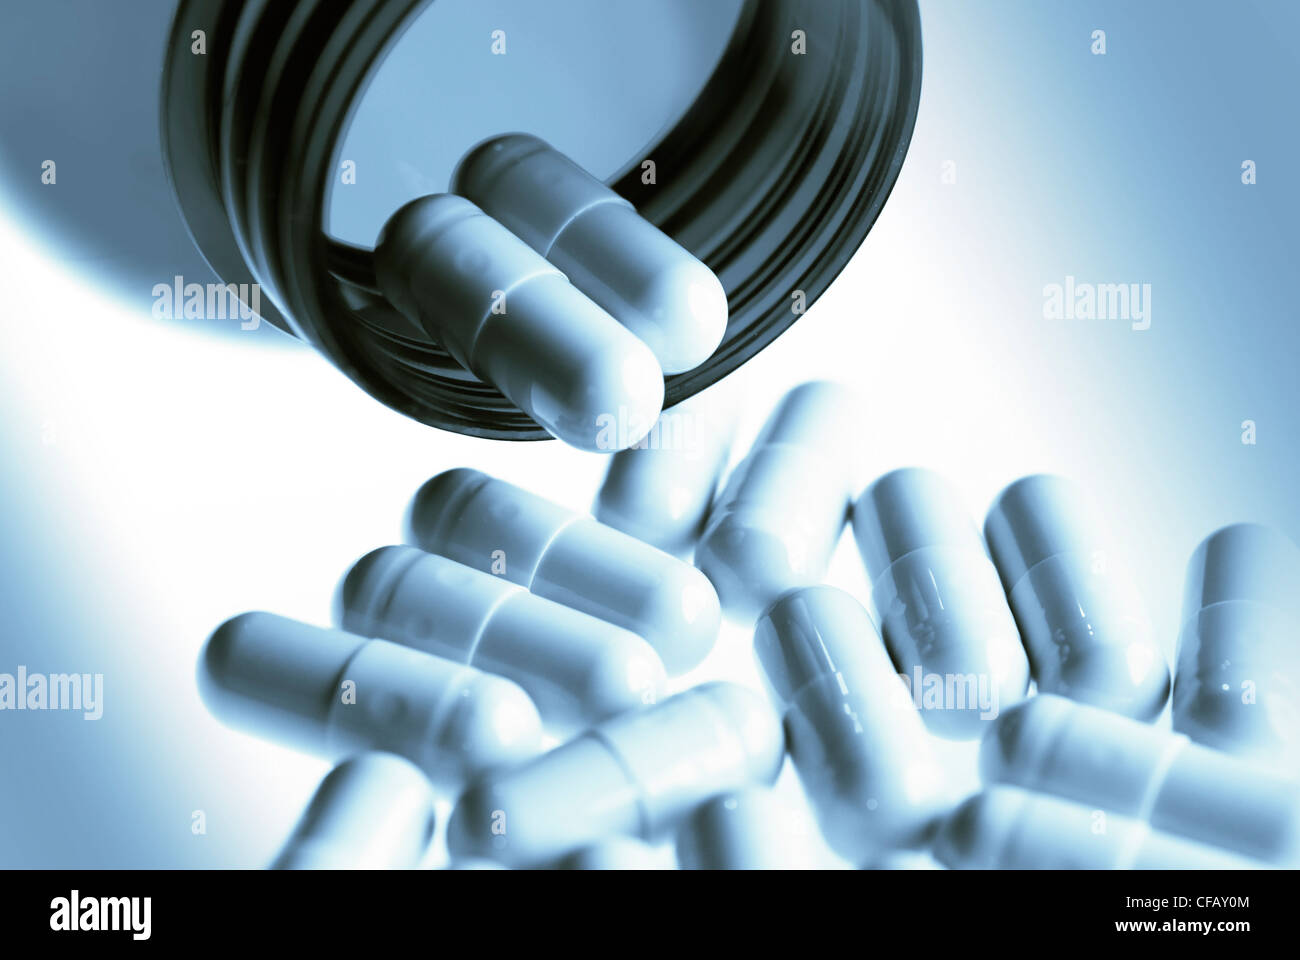 Pills in blue tones pouring out of a bottle in horizontal format Stock Photo